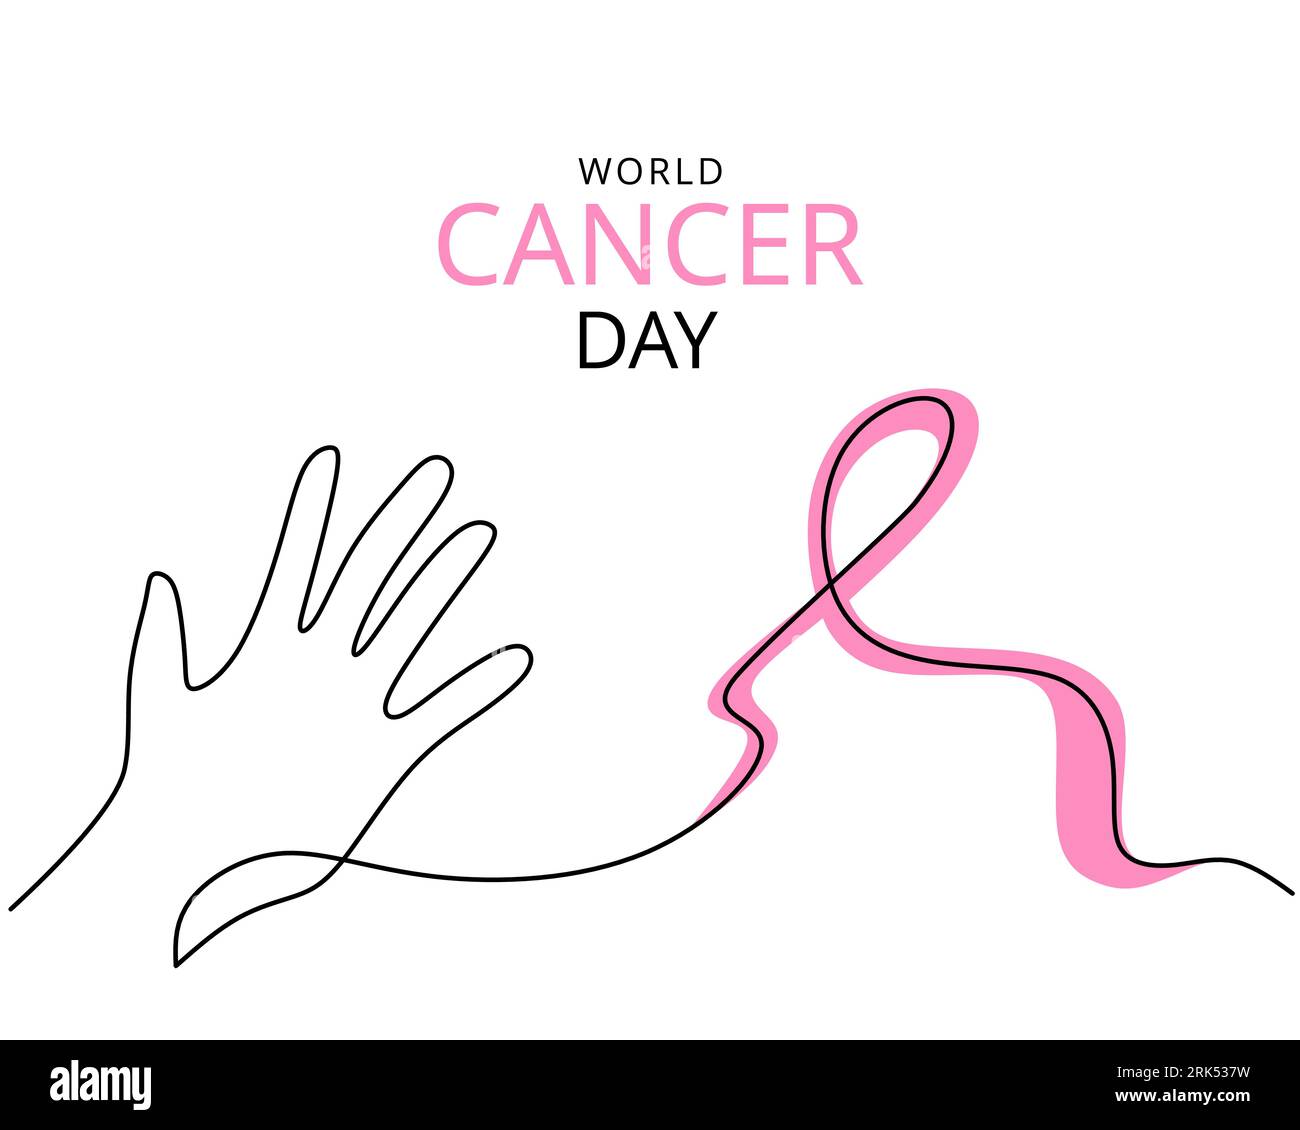 One single line of cancer day background isolated on white background. Stock Vector